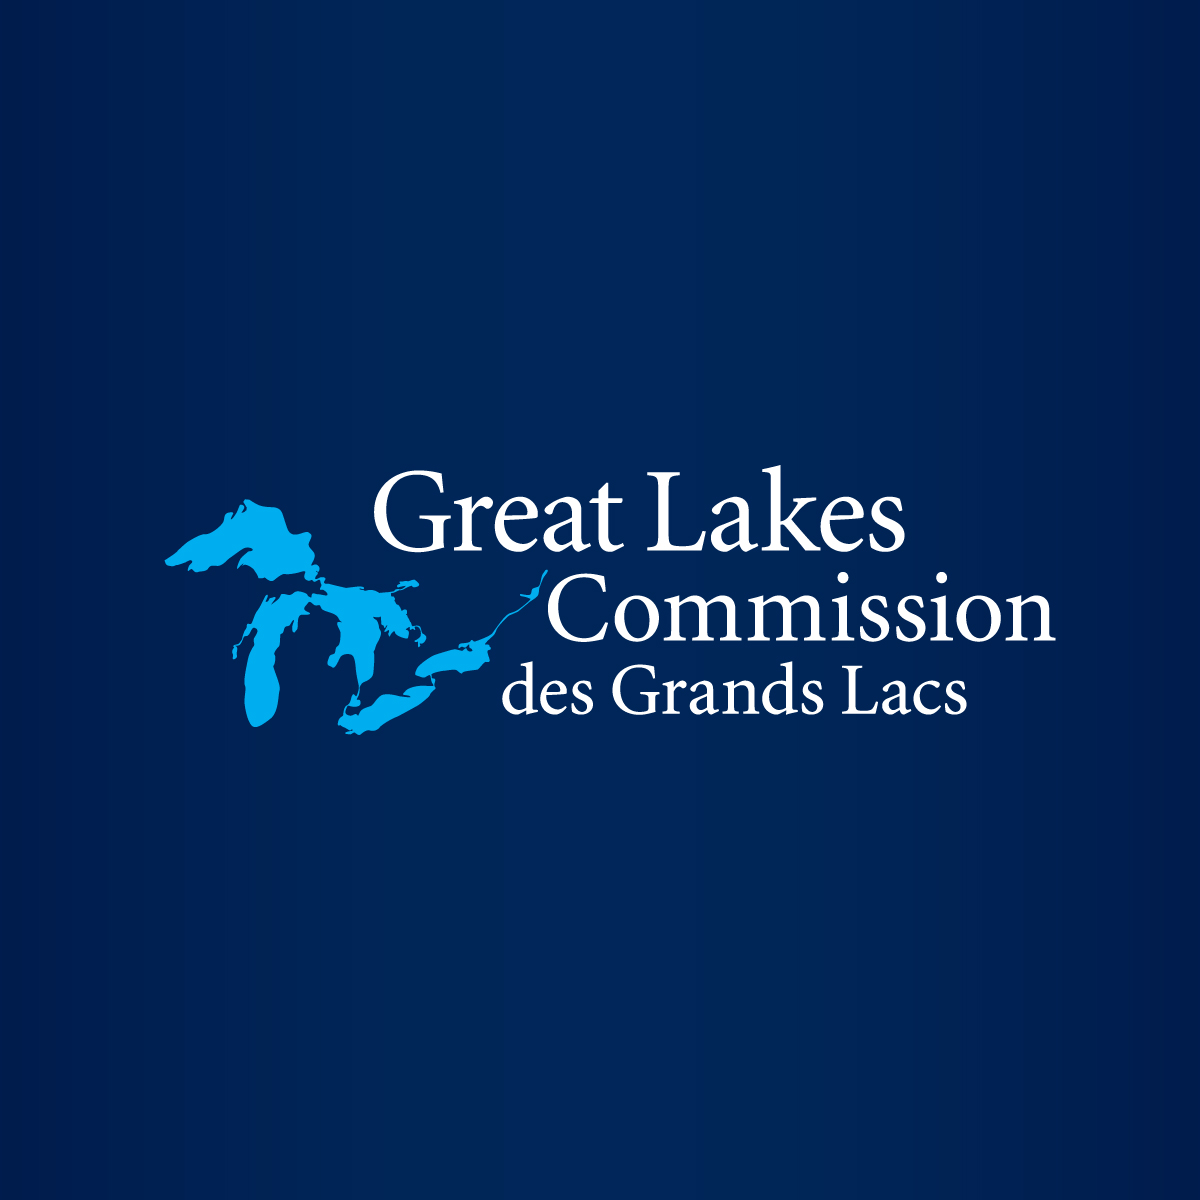 Stand Up for Great Lakes getting ready for their last journey